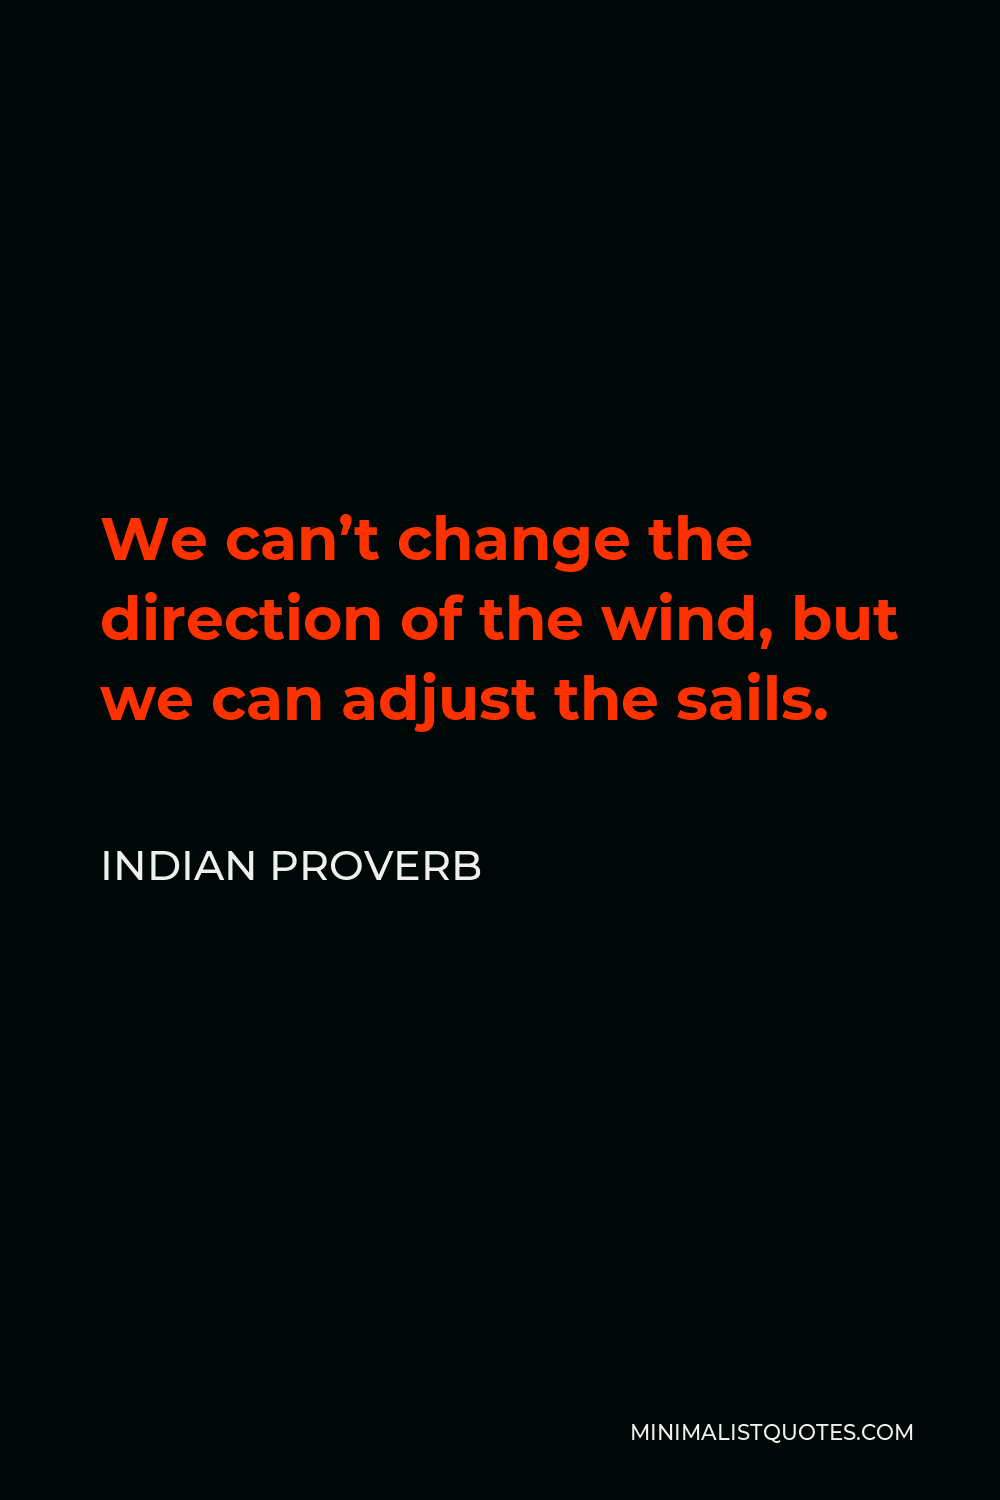 Indian Proverb Quote - We can’t change the direction of the wind, but we can adjust the sails.